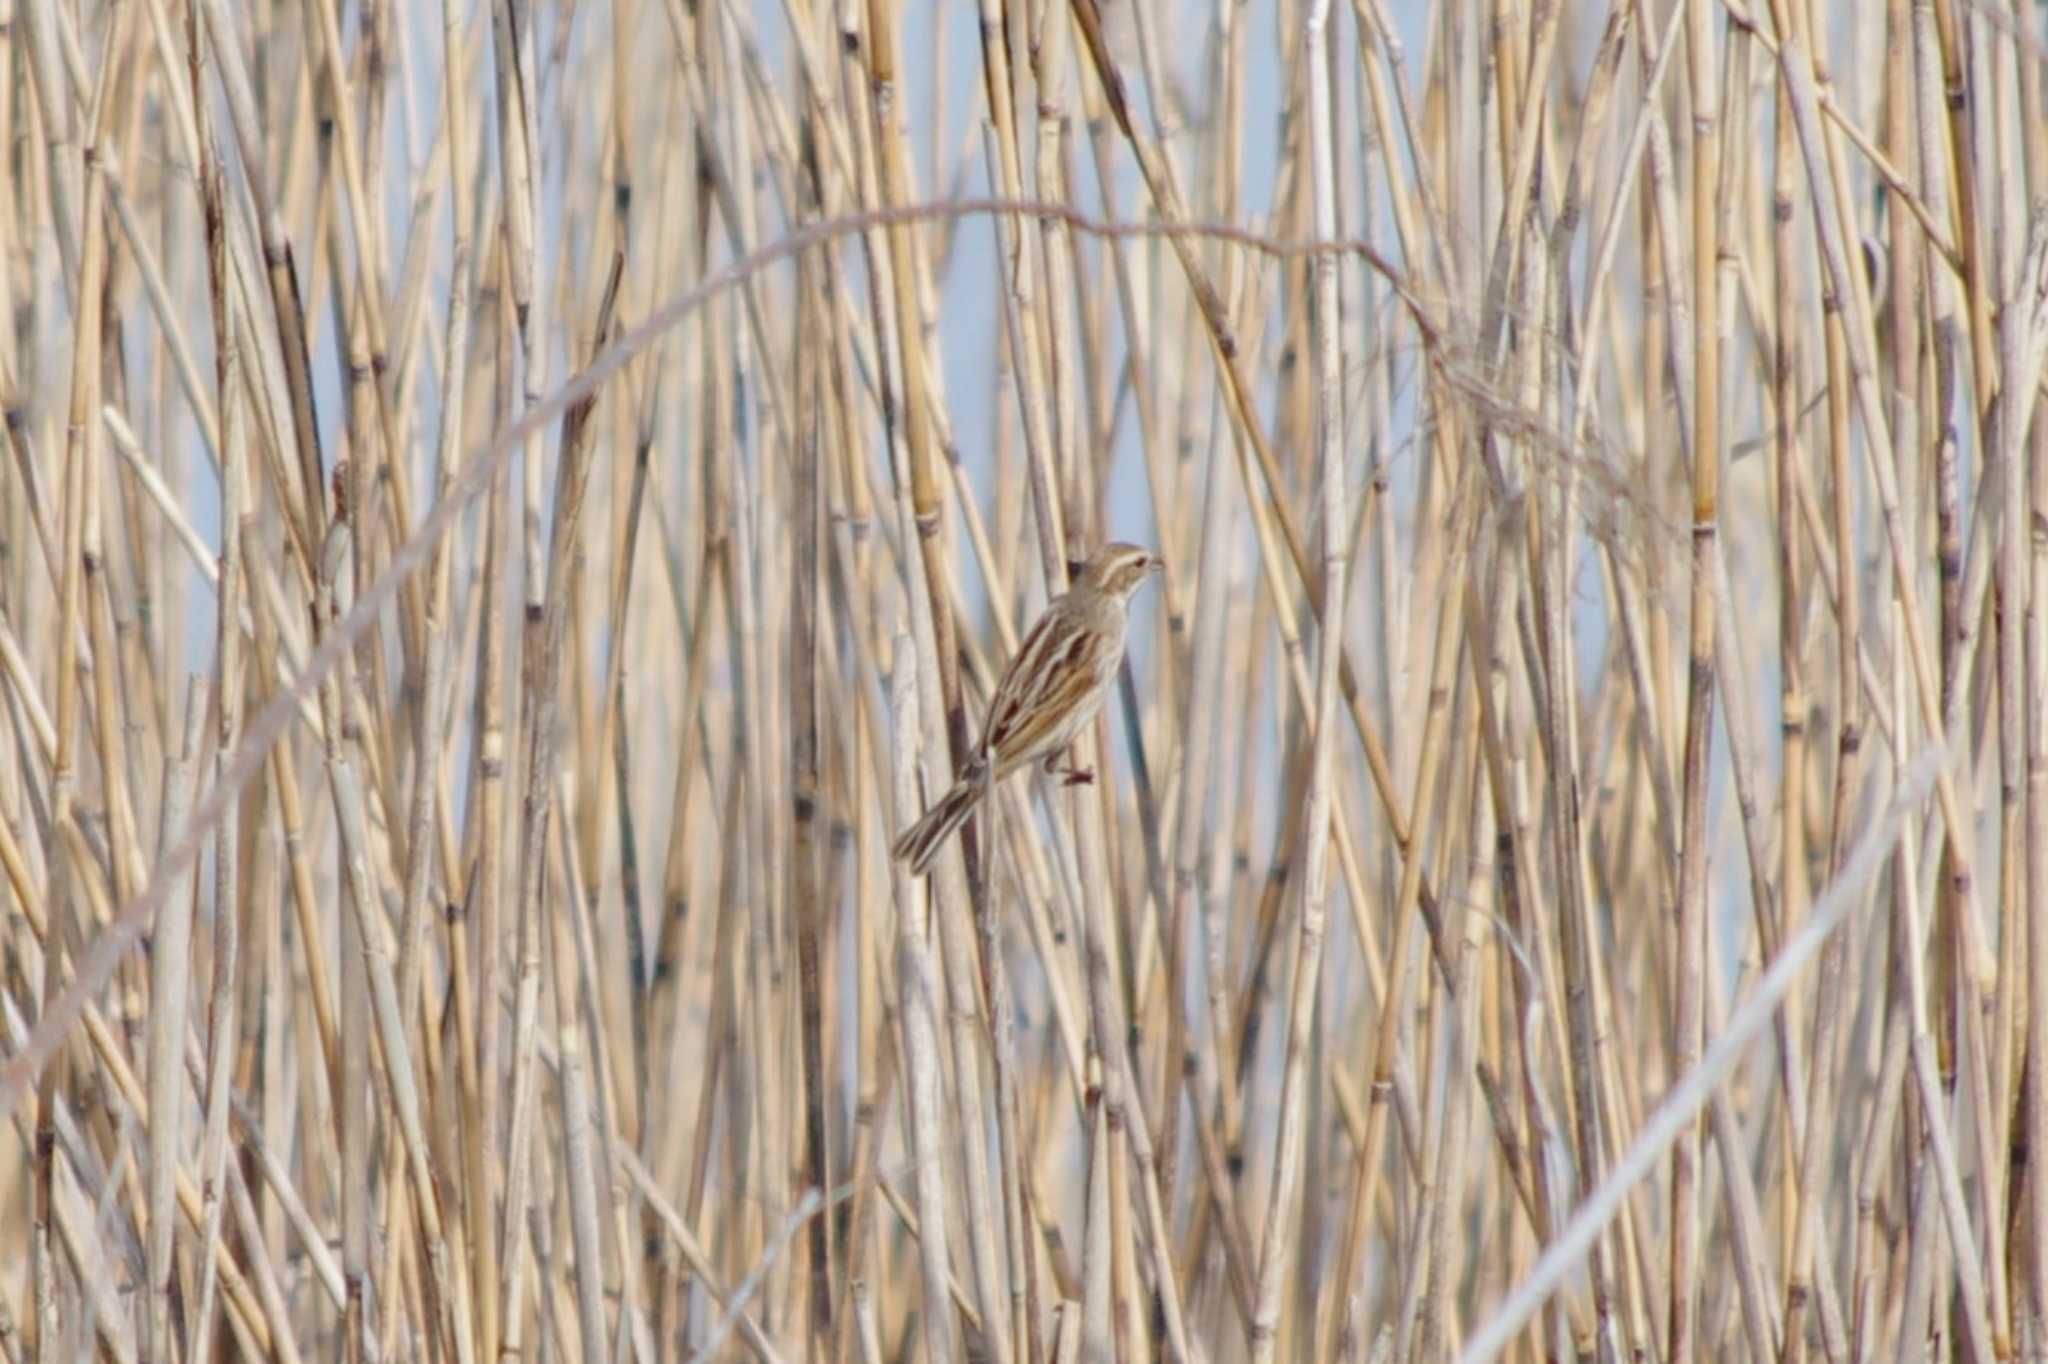 Photo of Common Reed Bunting at 霞ヶ浦総合公園 by アカウント15604